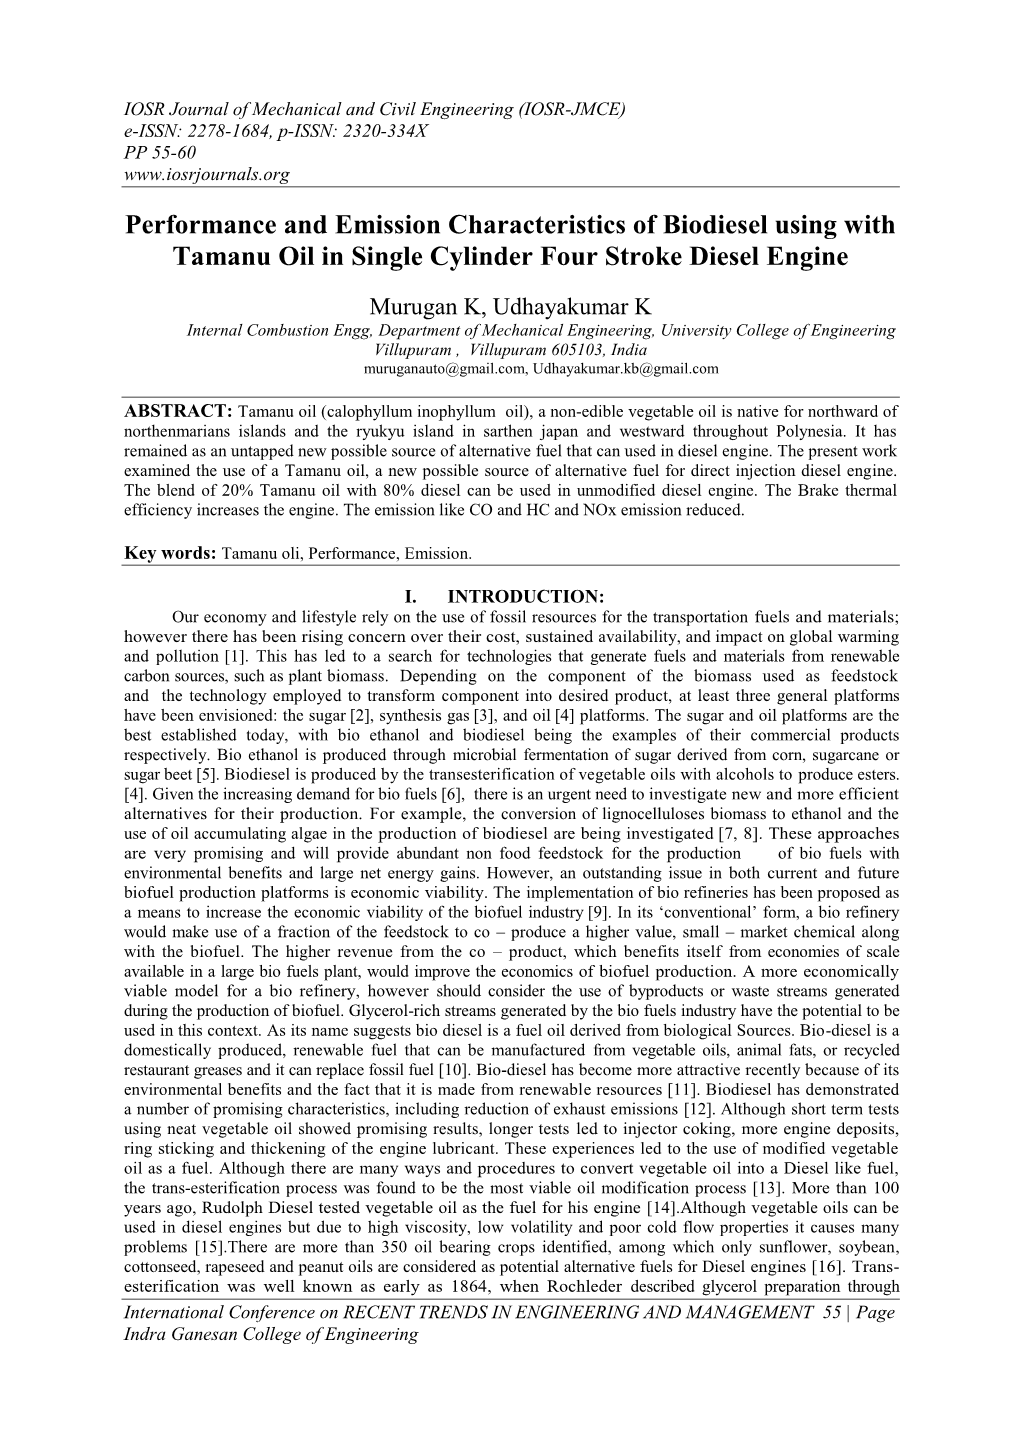 Performance and Emission Characteristics of Biodiesel Using with Tamanu Oil in Single Cylinder Four Stroke Diesel Engine